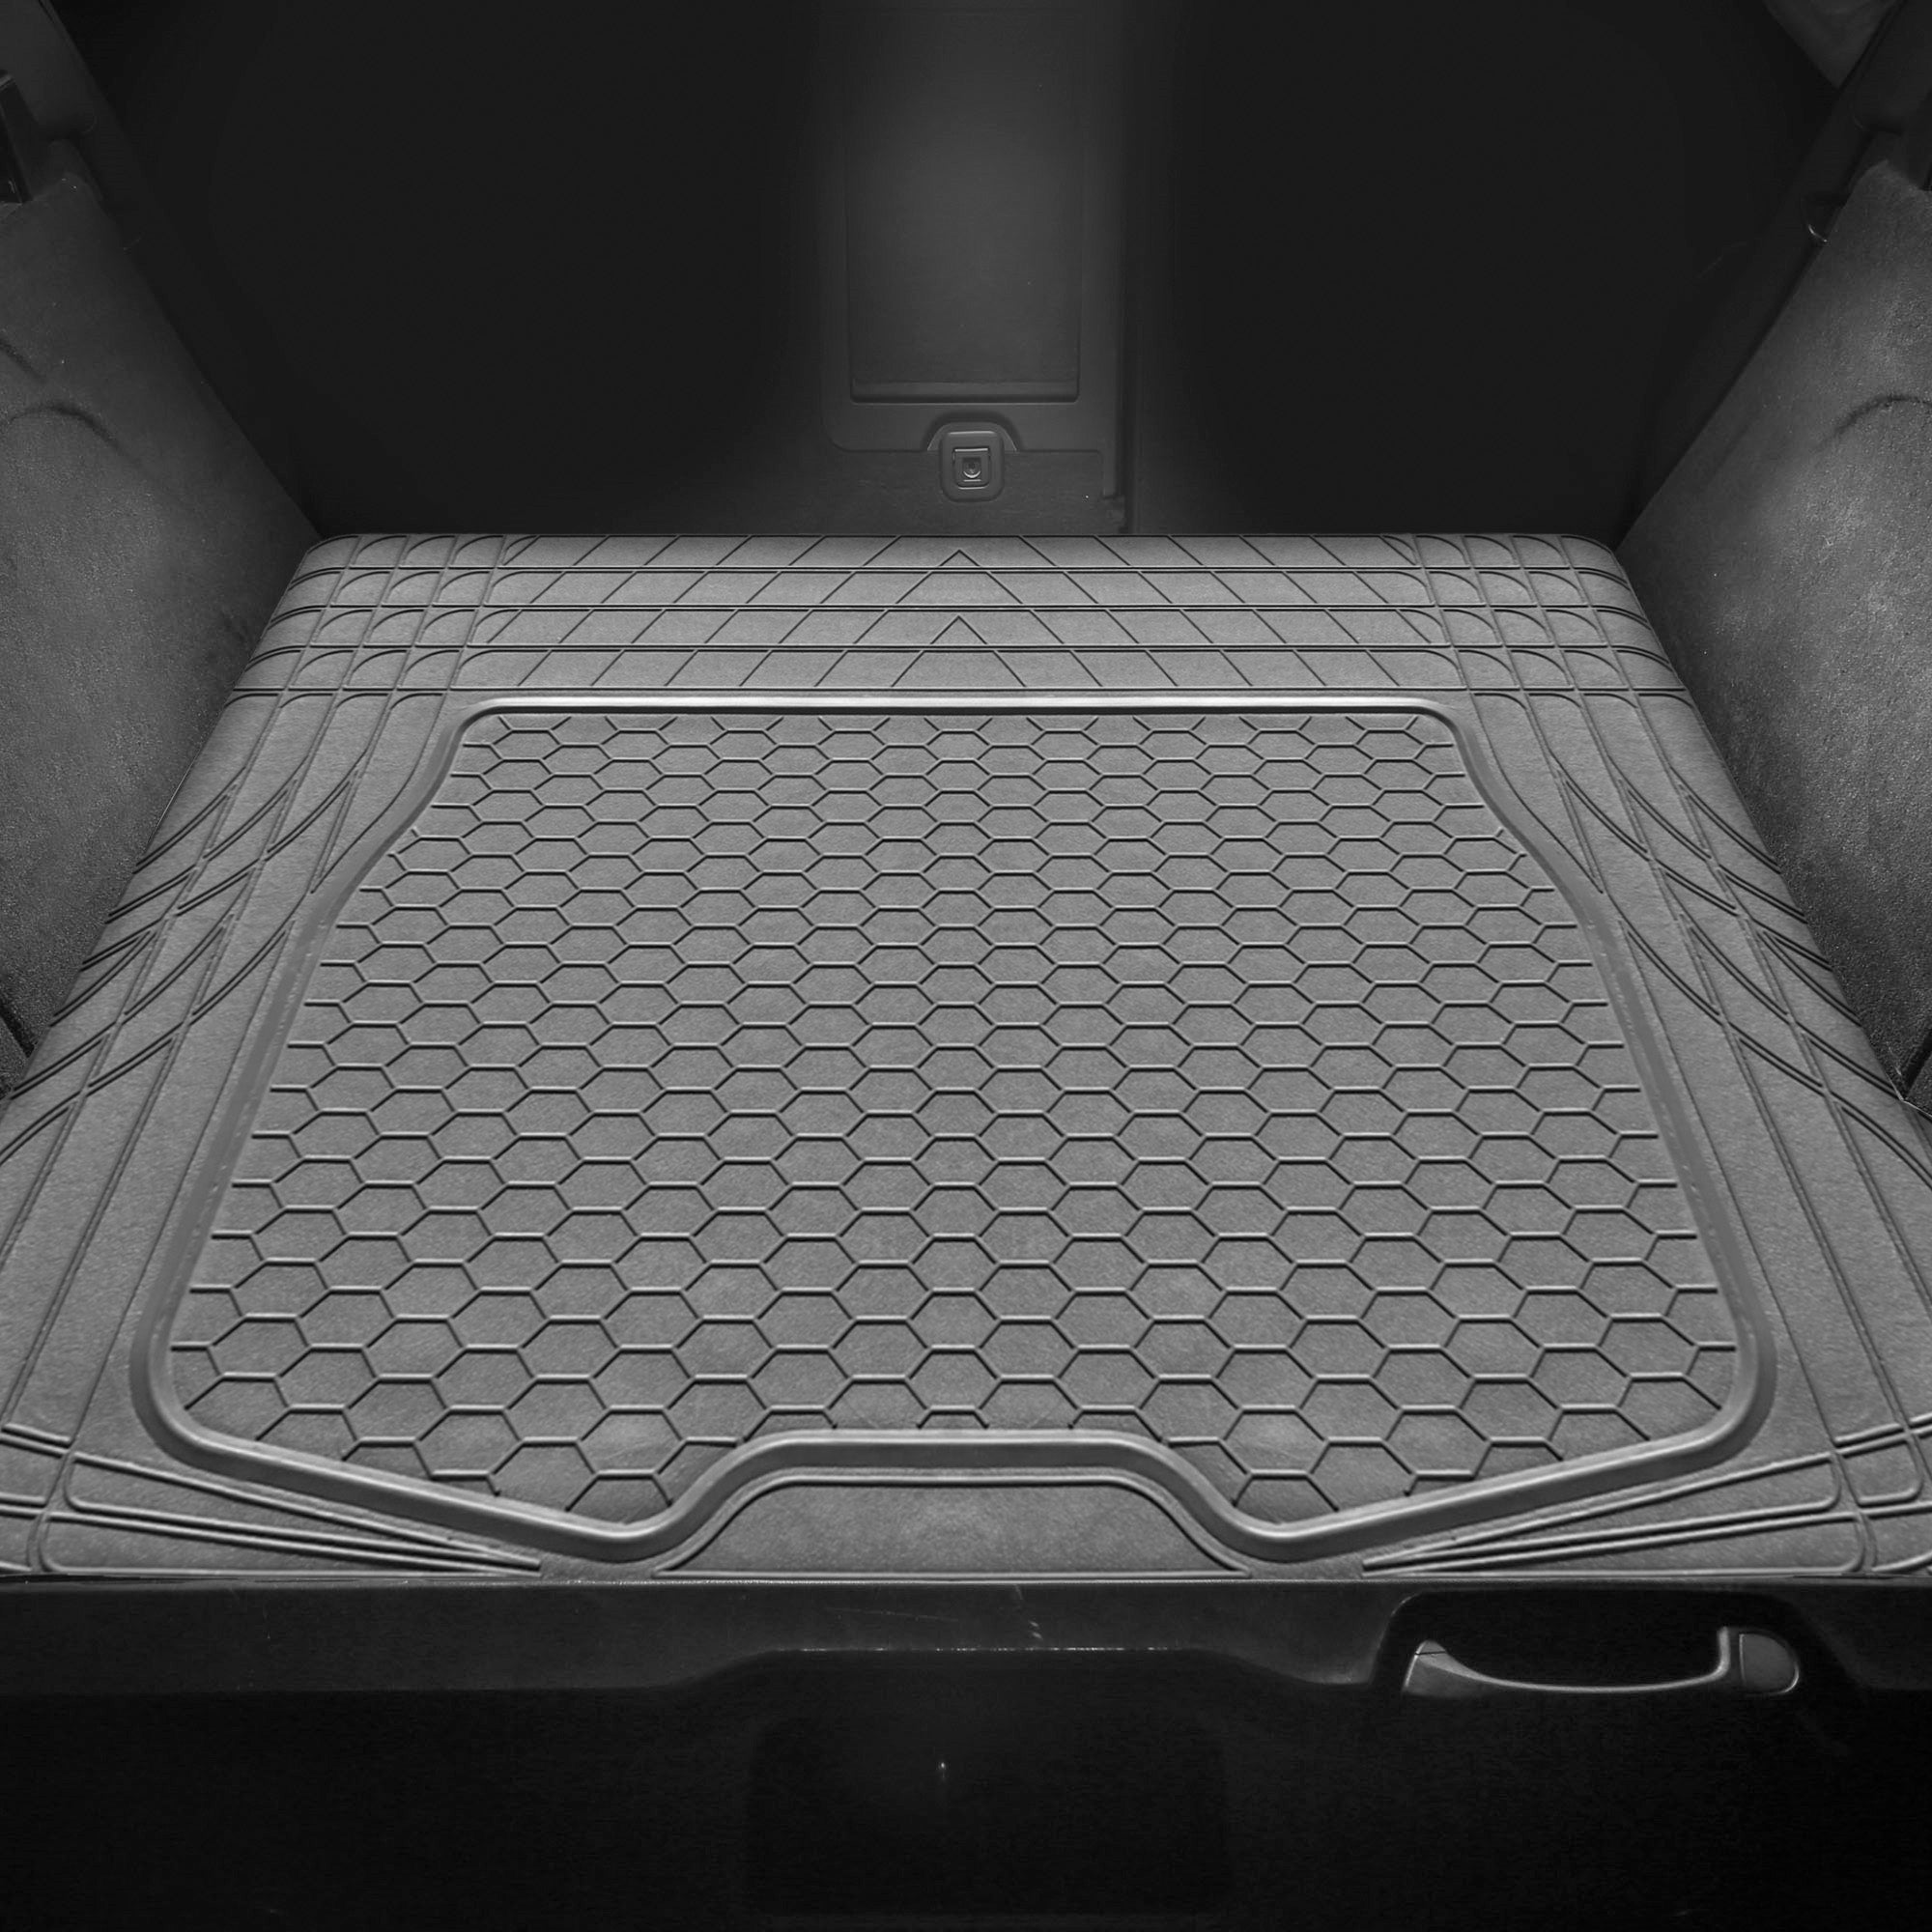 ClimaProof Trimmable Non-Slip Vinyl Cargo Liner Gray